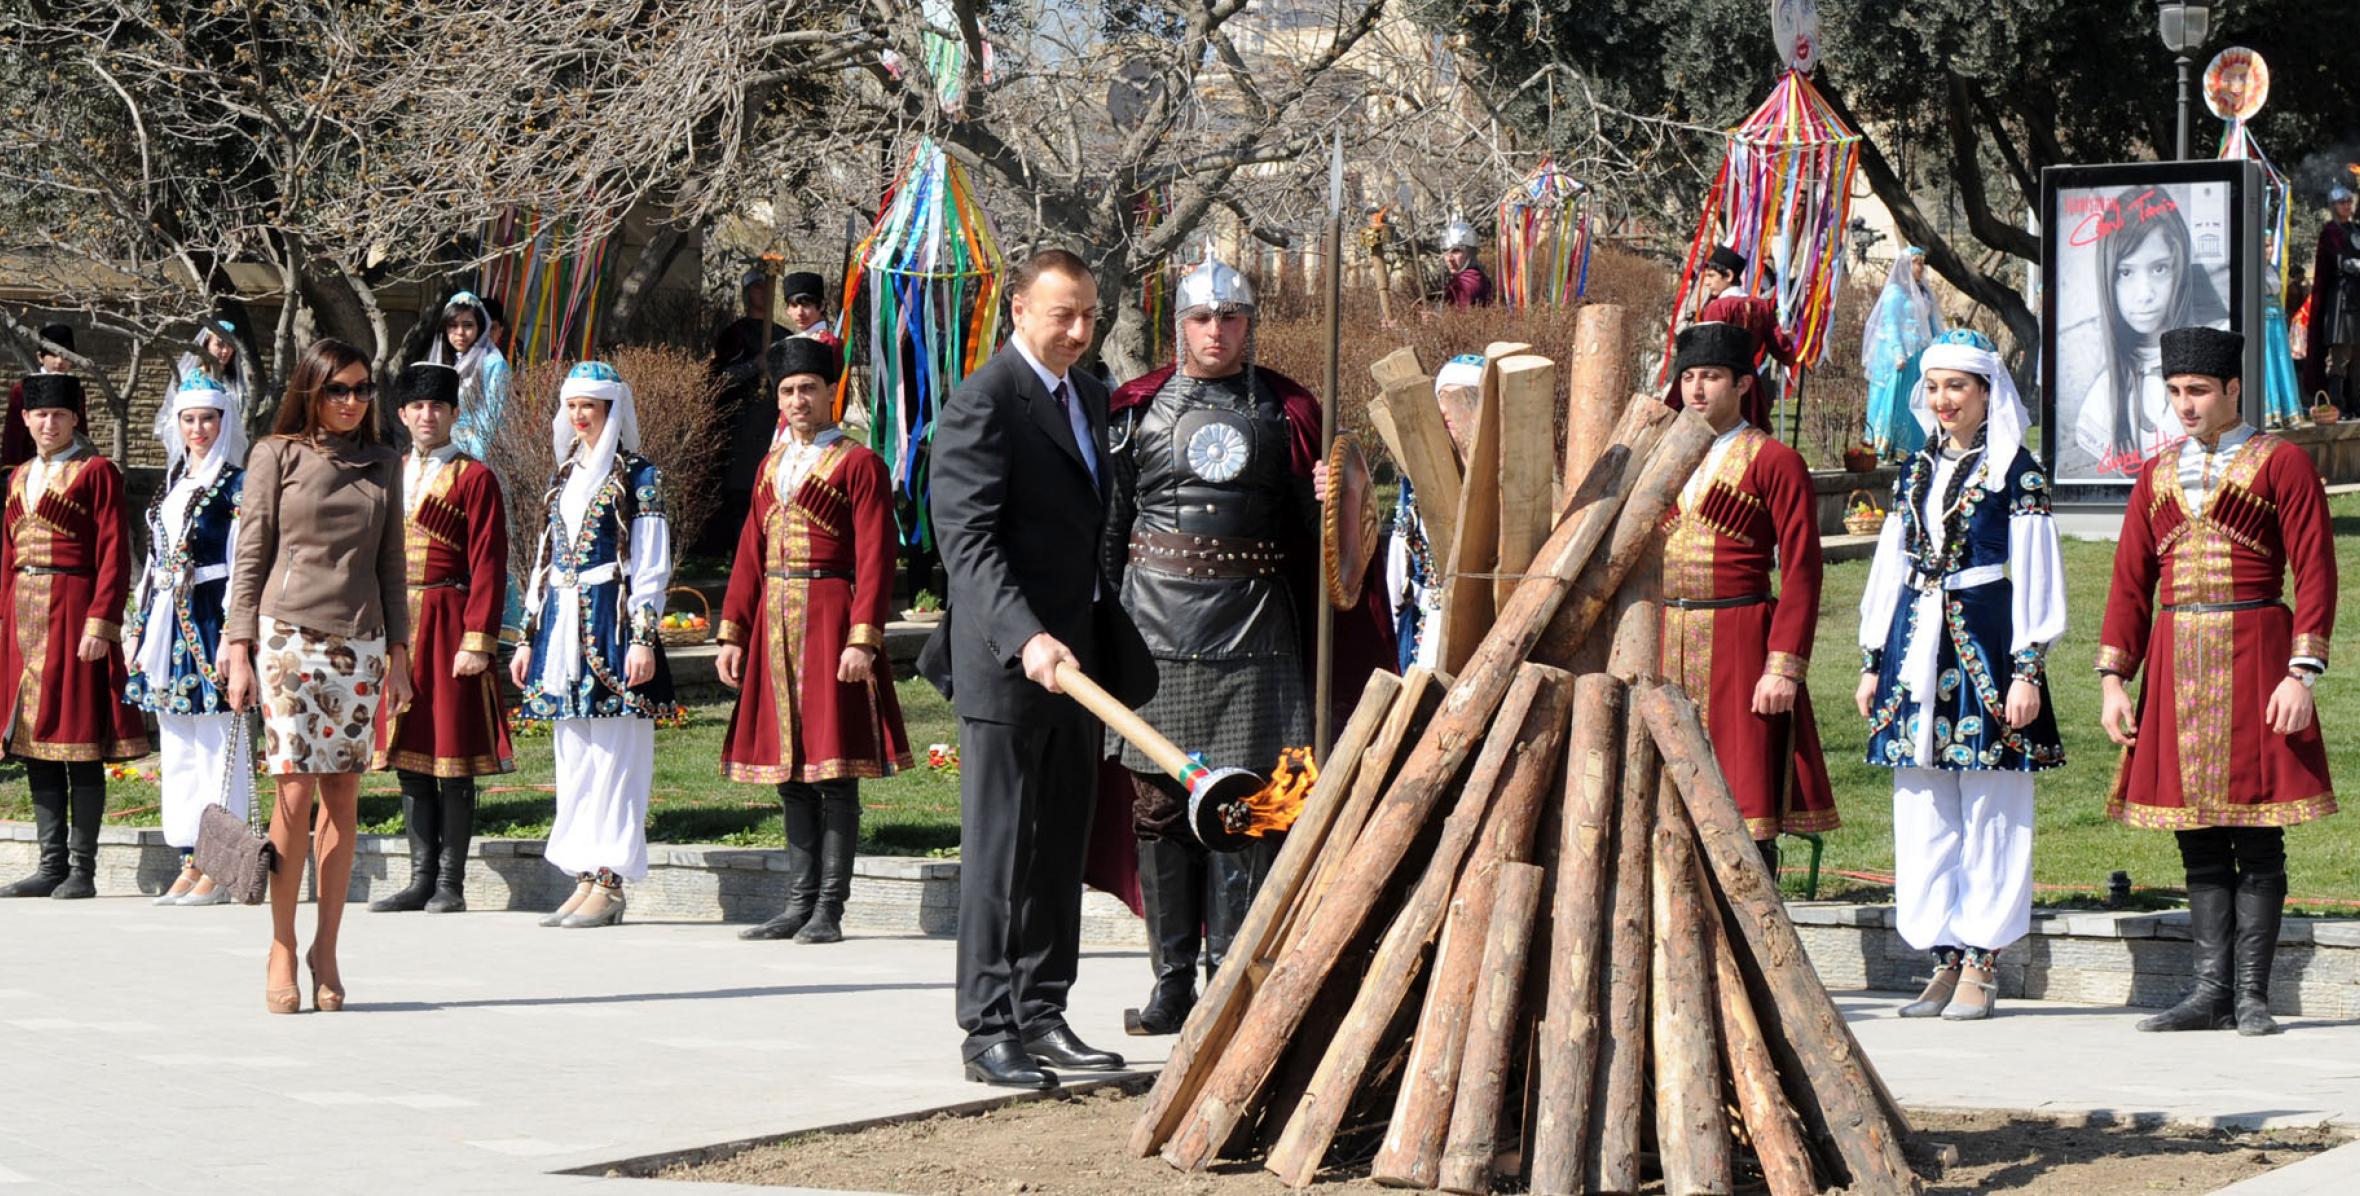 Ilham Aliyev took part in nationwide festivities on the occasion of Novruz holiday